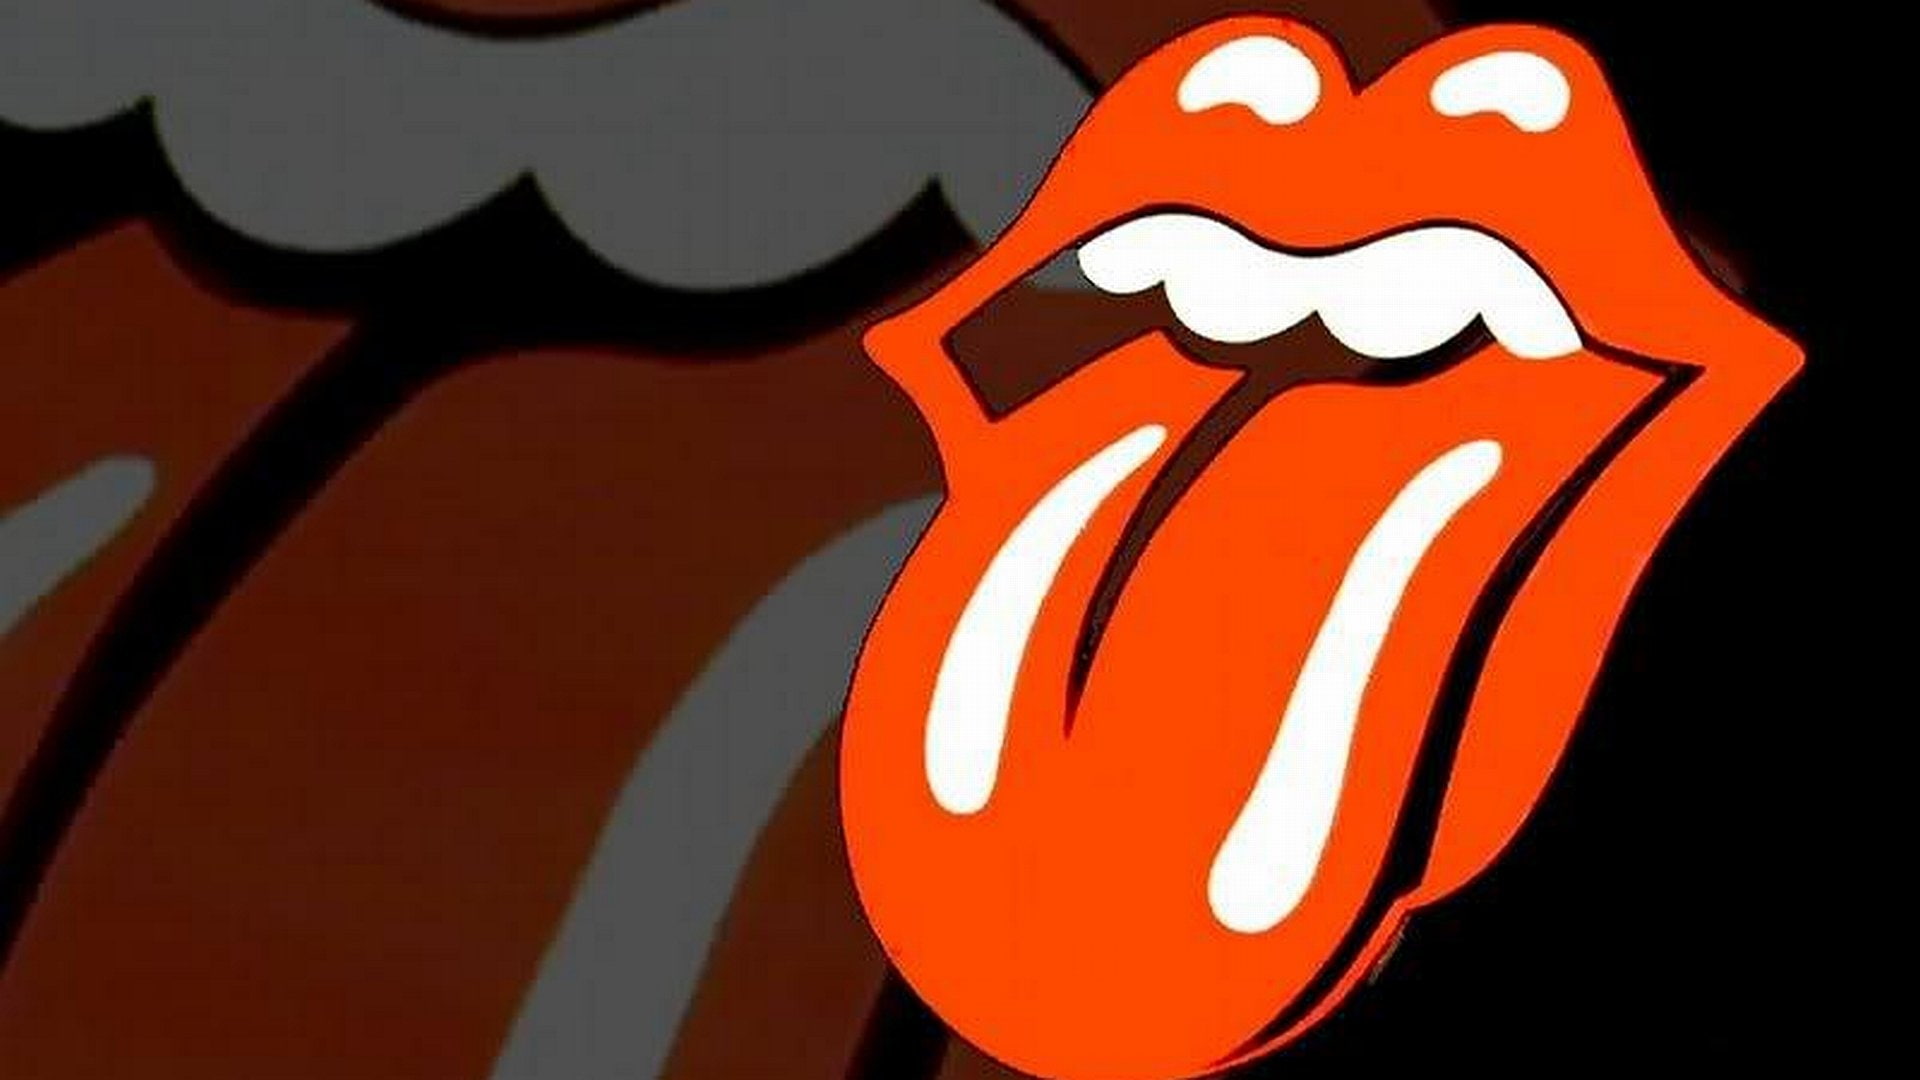 Rolling Stones logo, Band (Music), The Rolling Stones